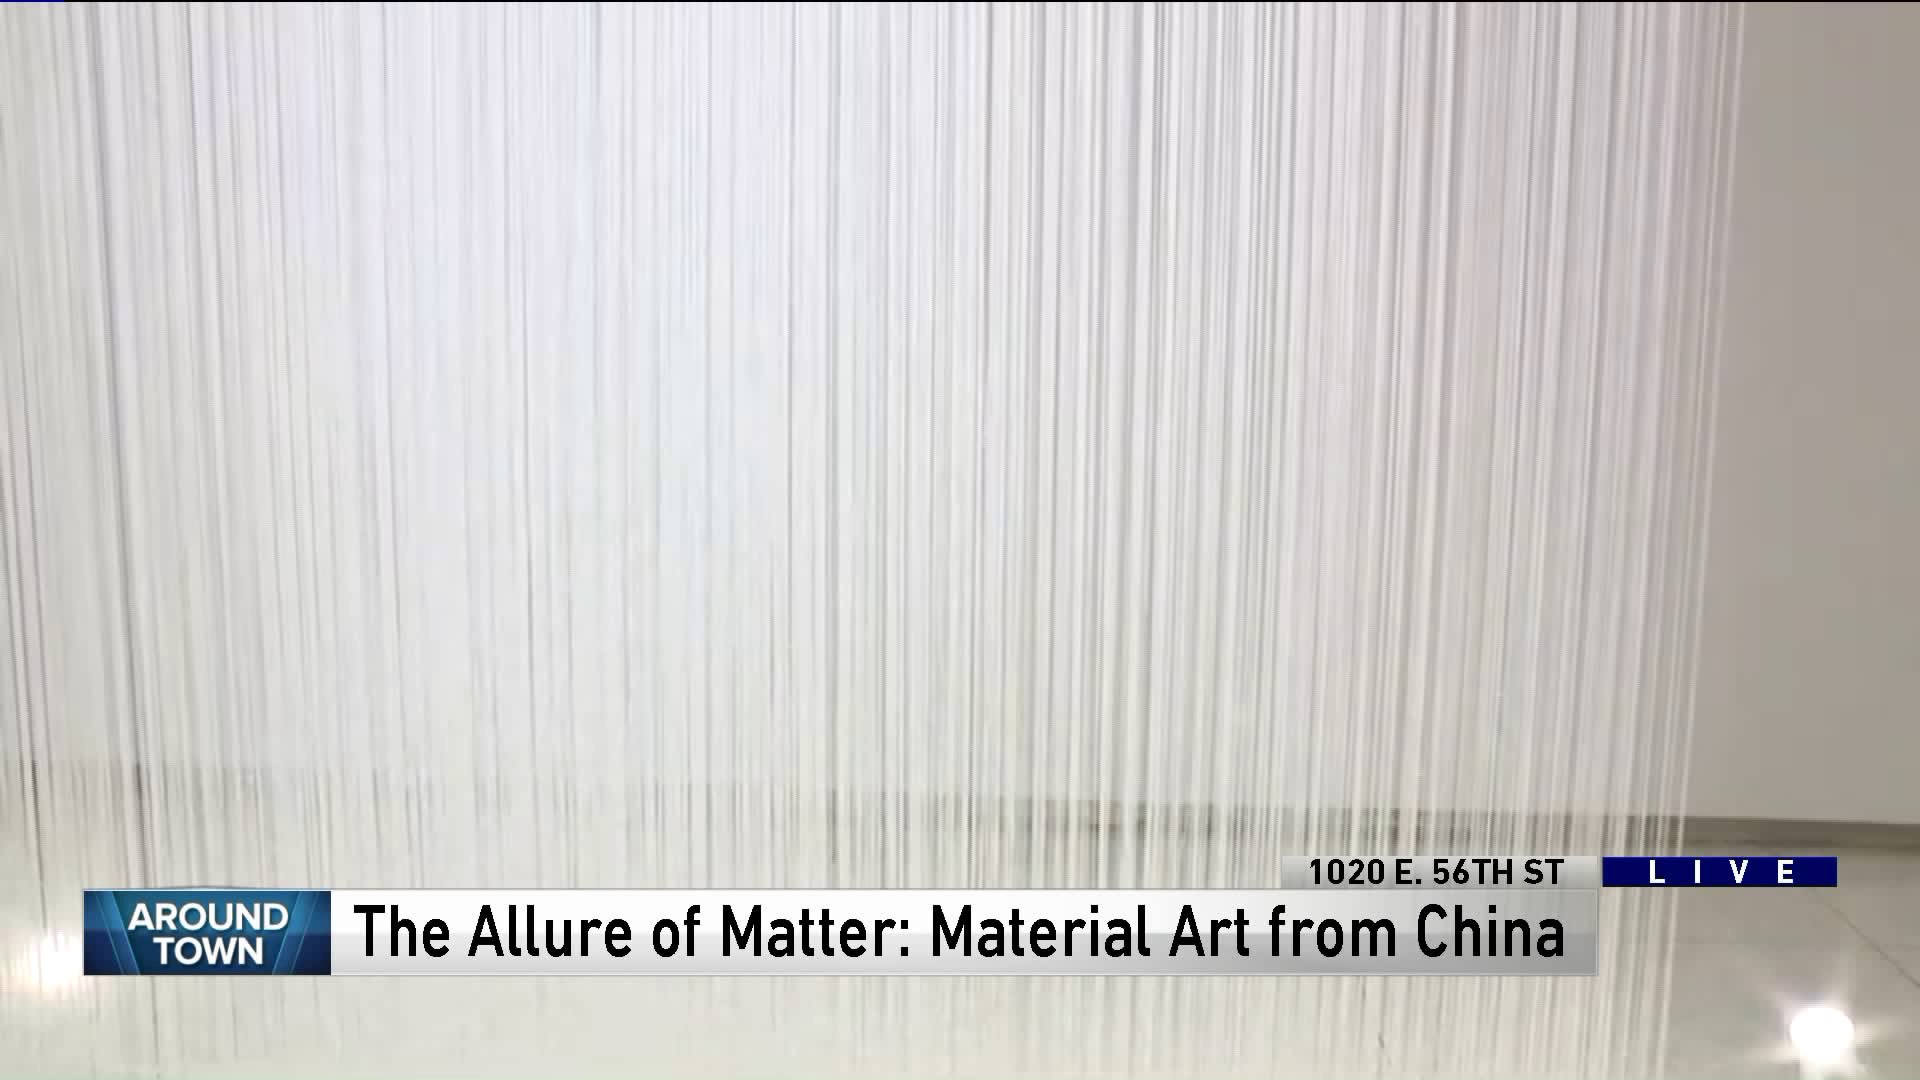 Around Town checks out The Allure of Matter: Material Art from China